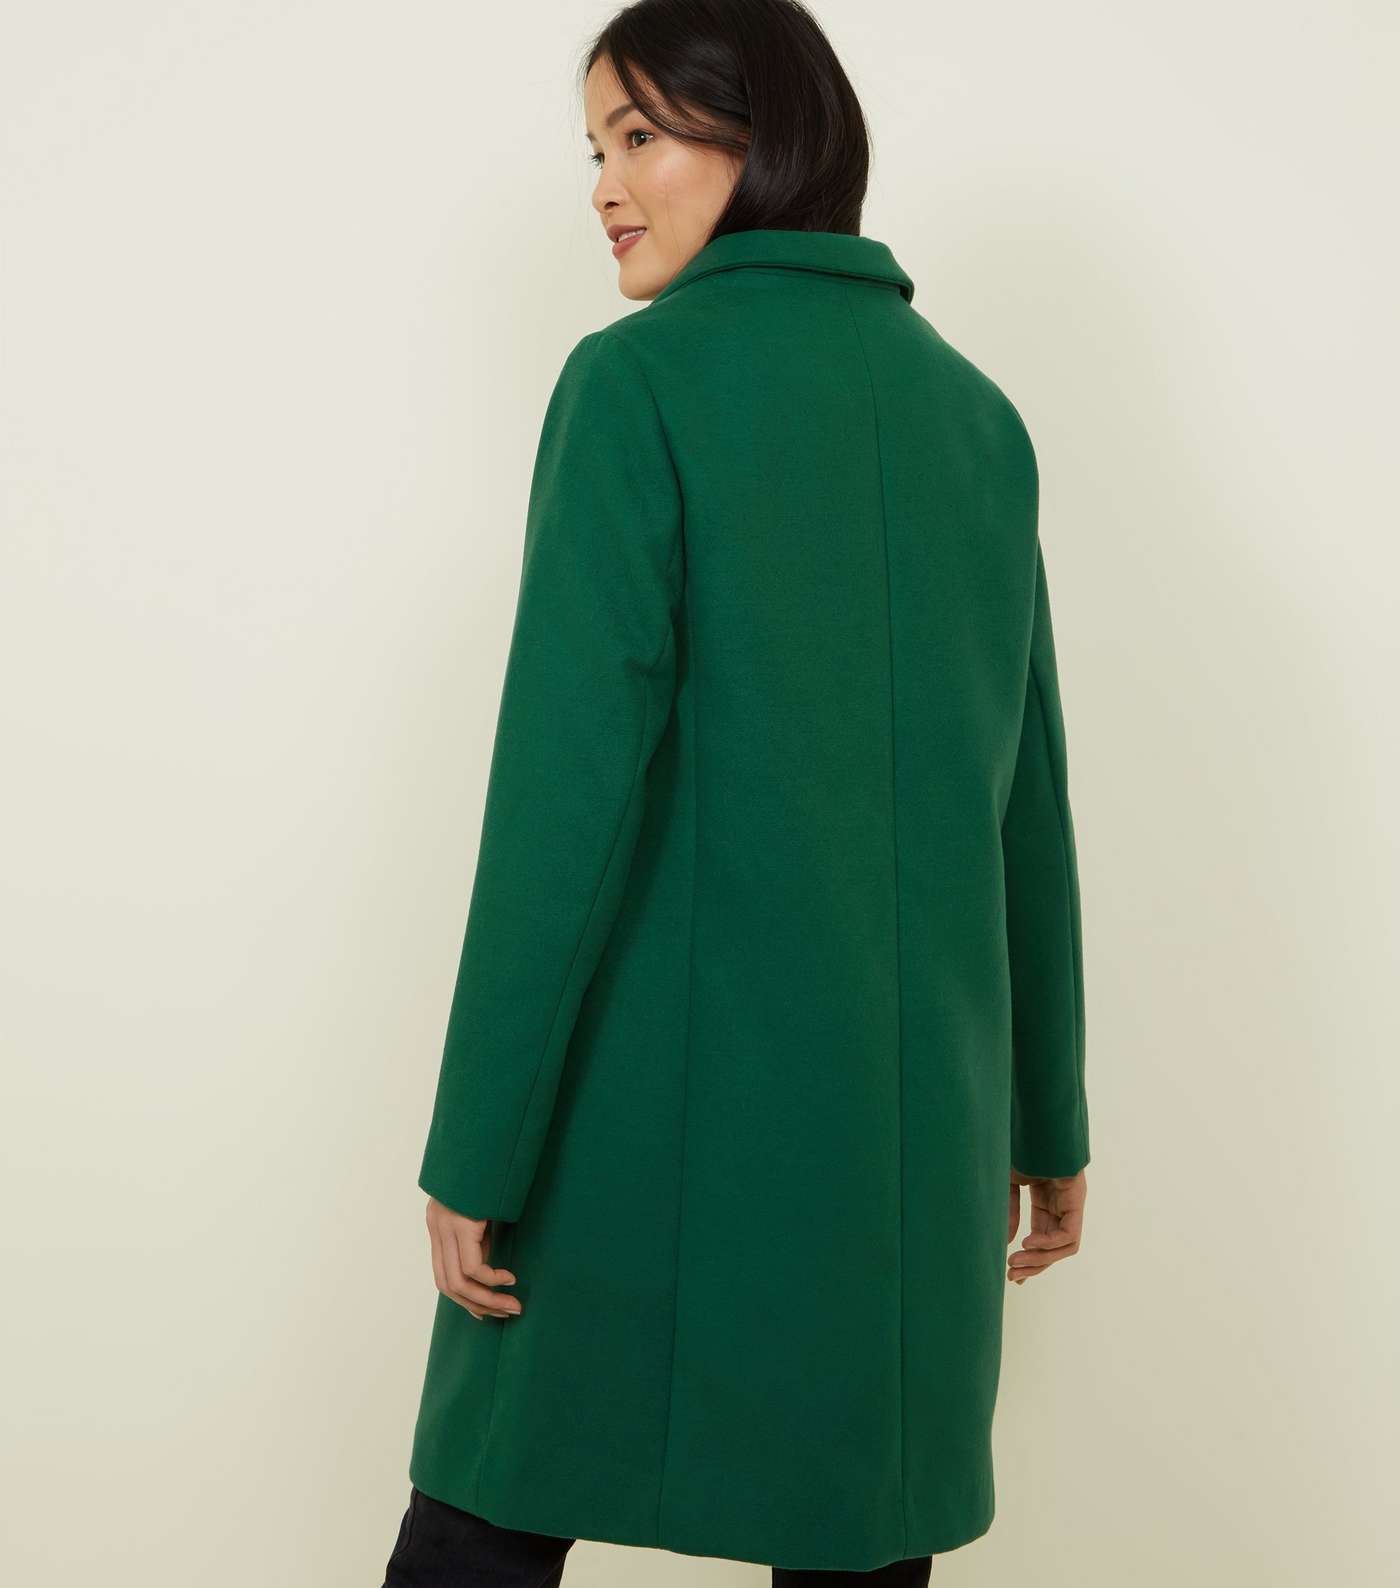 Green Single Breasted Formal Coat Image 3